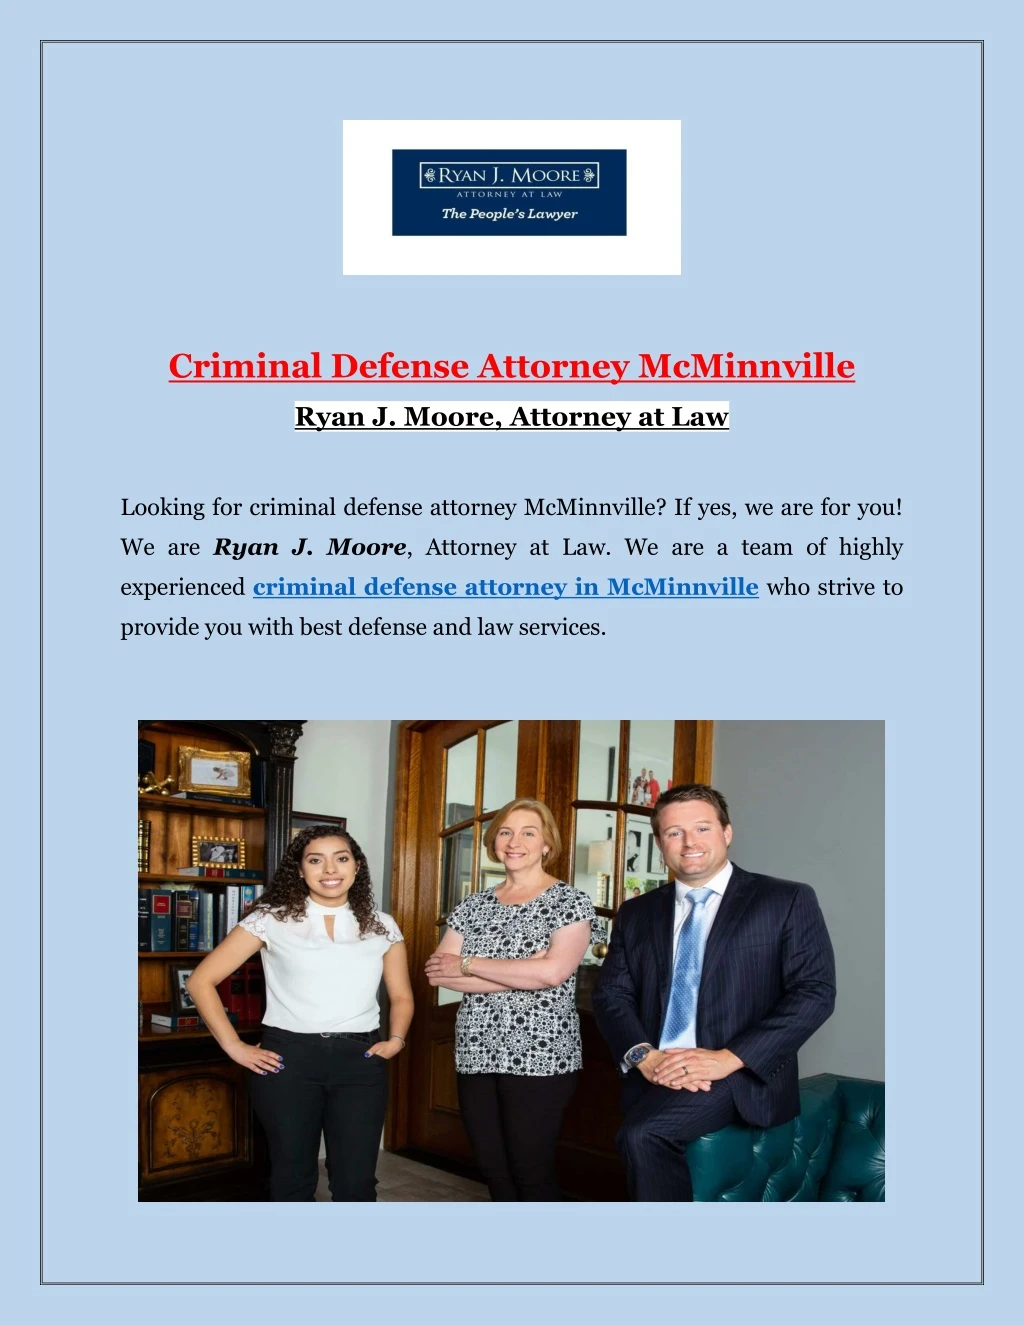 criminal defense attorney mcminnville n.